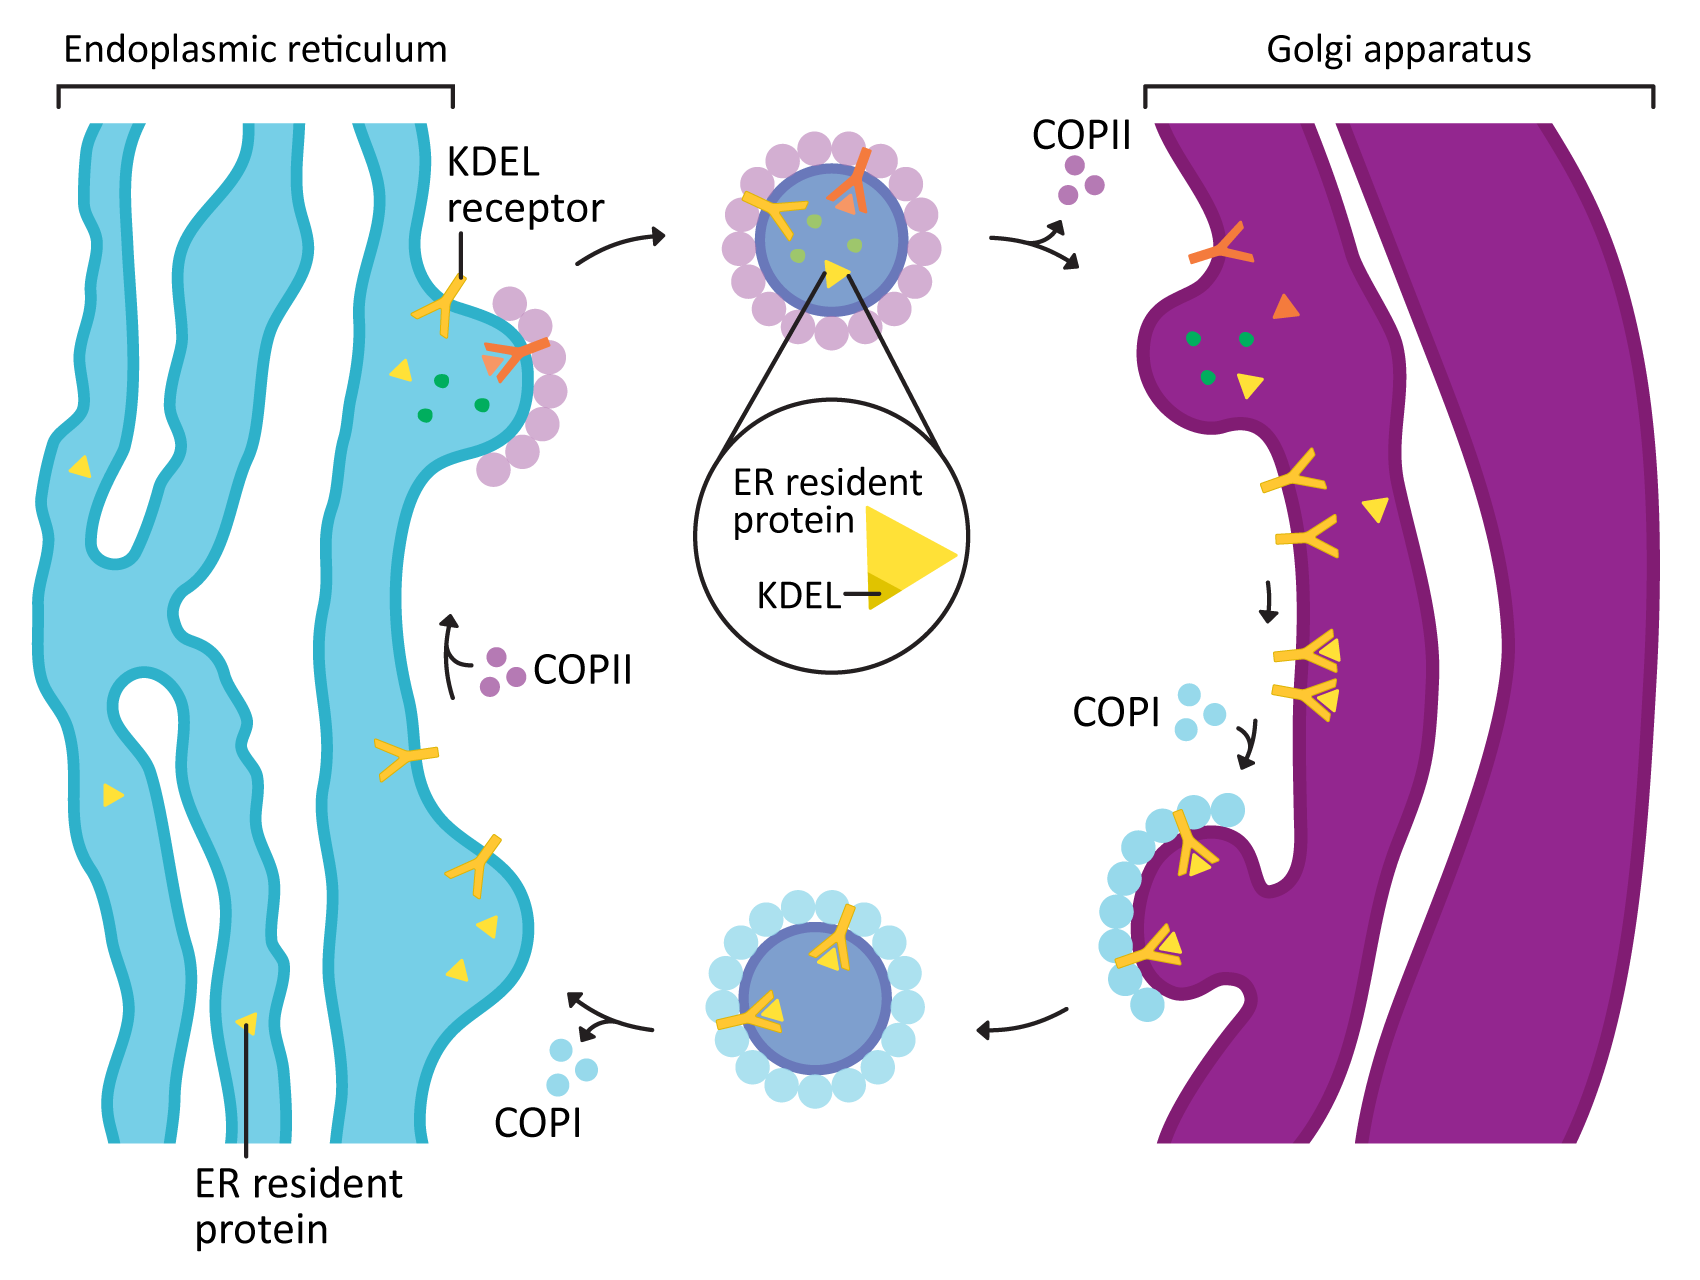 COPI and COPII-coated vesicles control traffic between the ER and the Golgi.